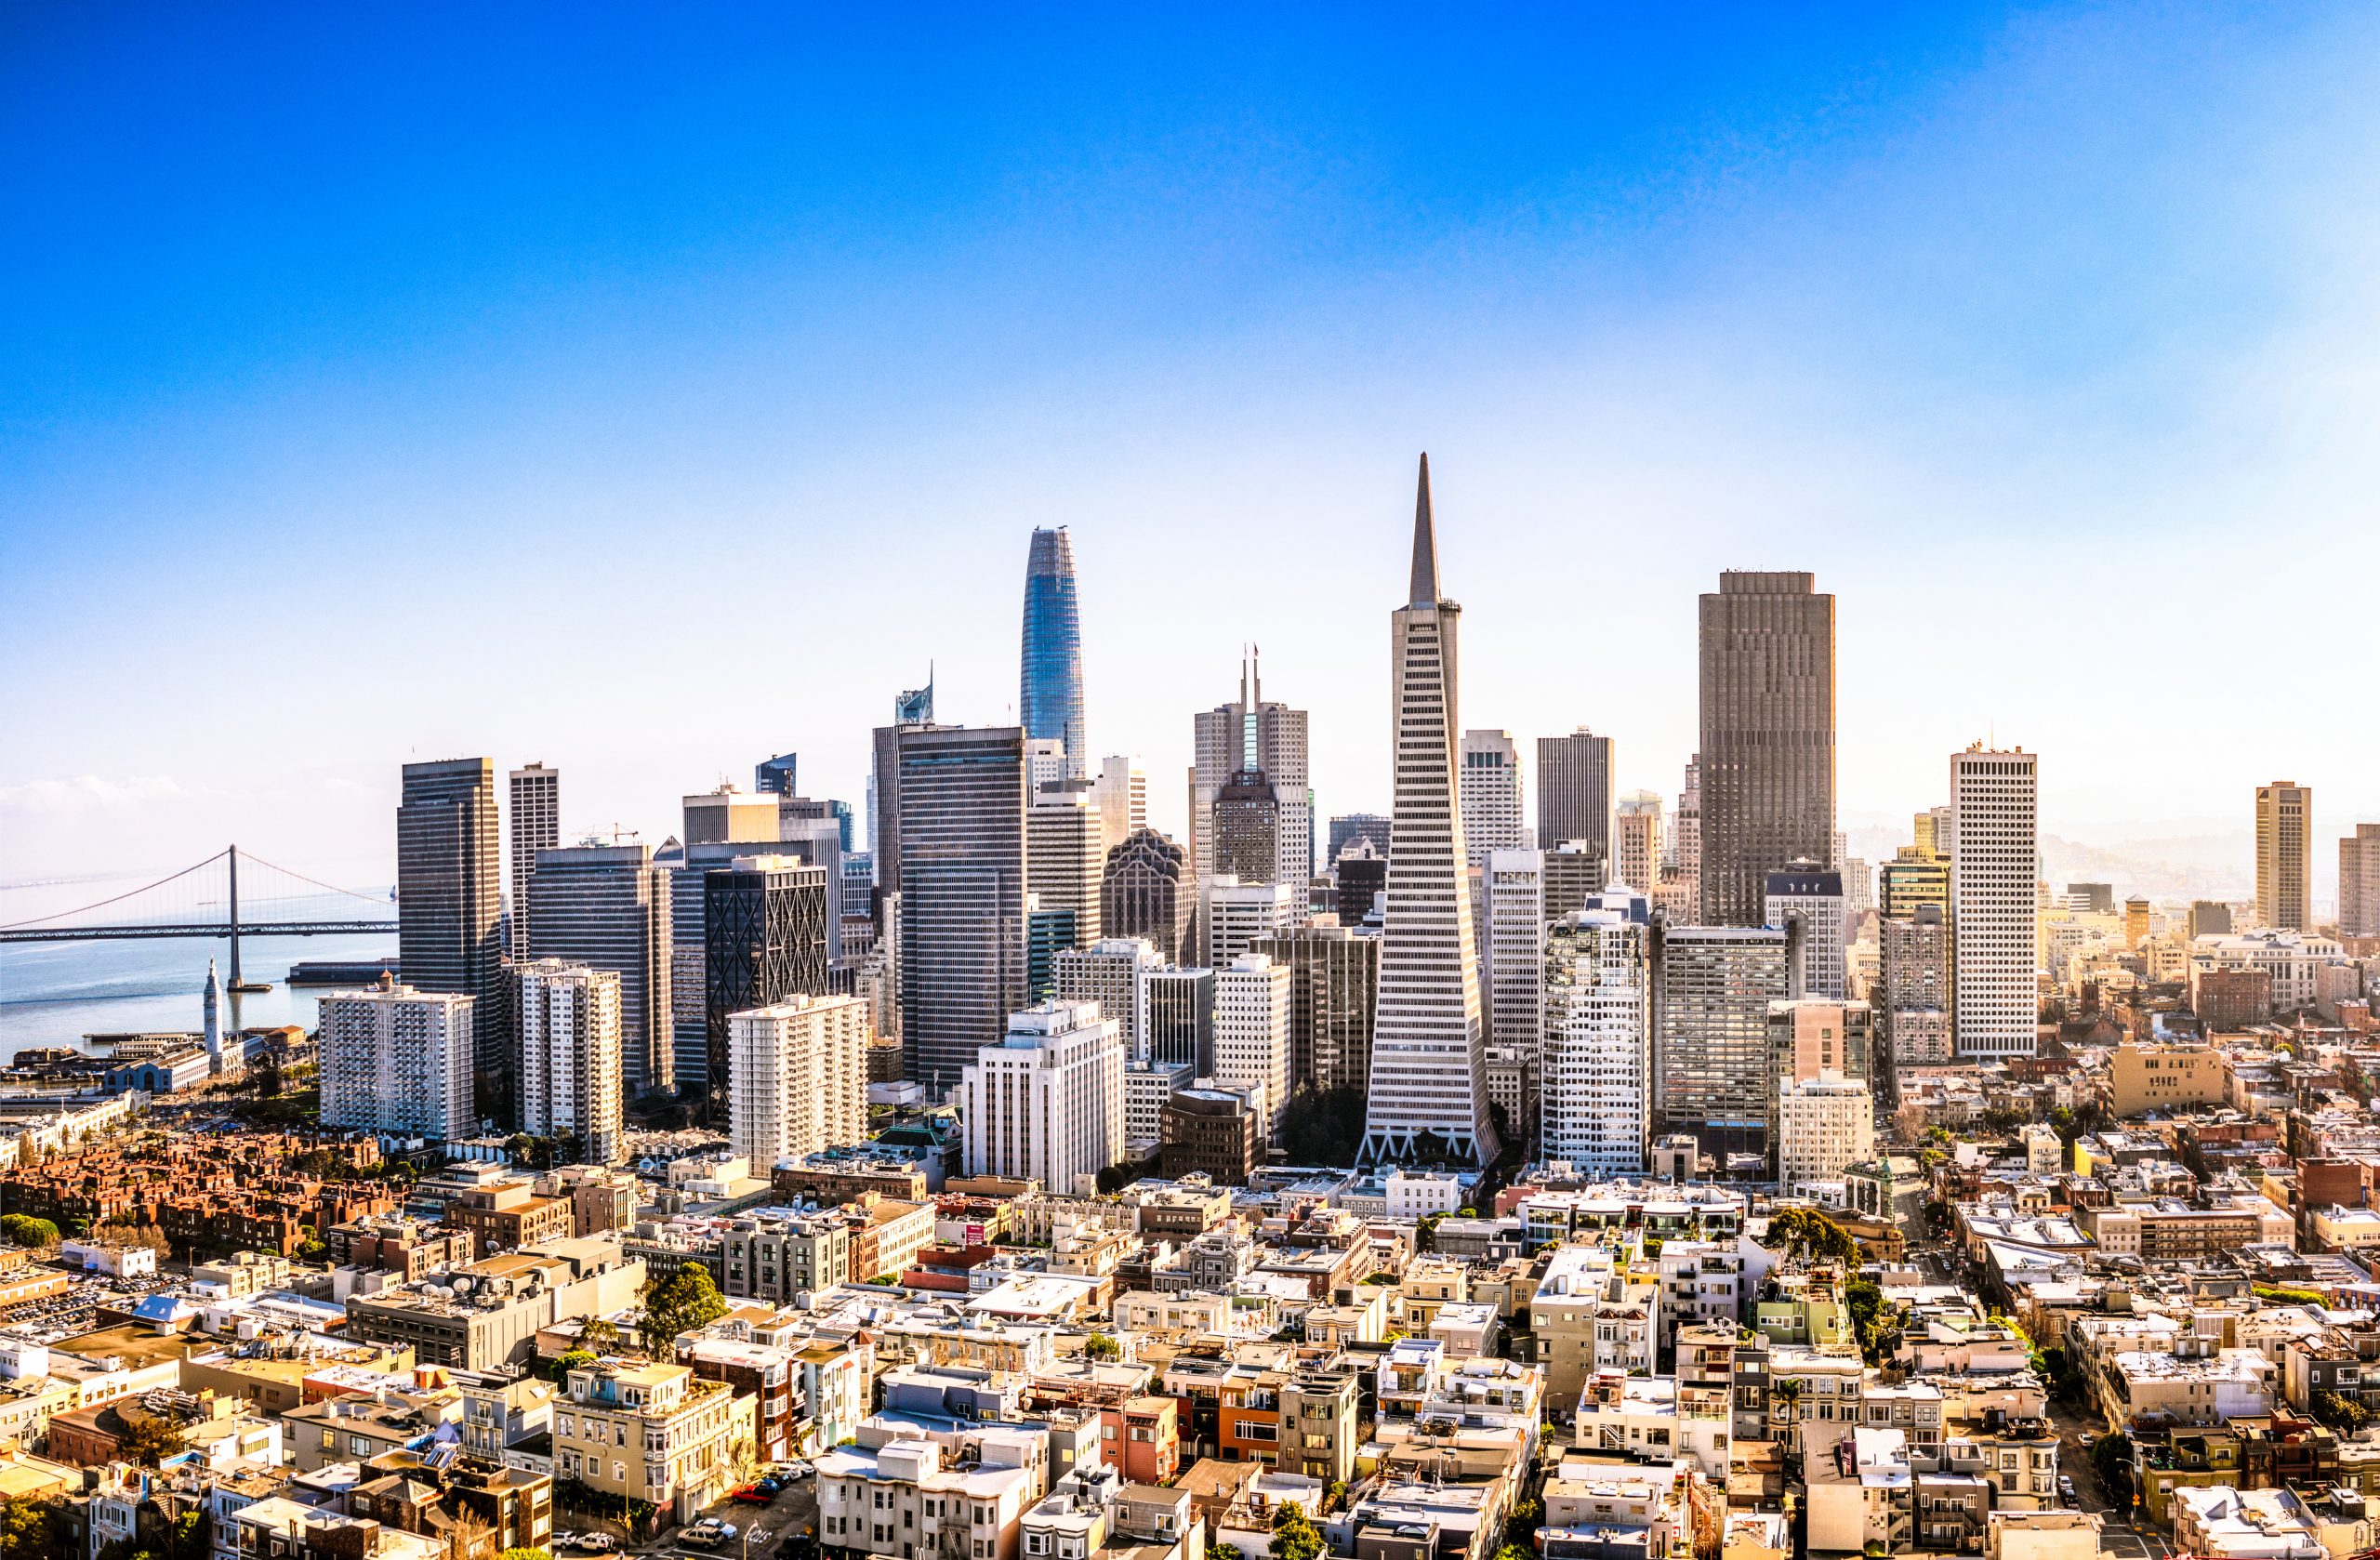 A high angle view of San Francisco's business district on a sunny day.